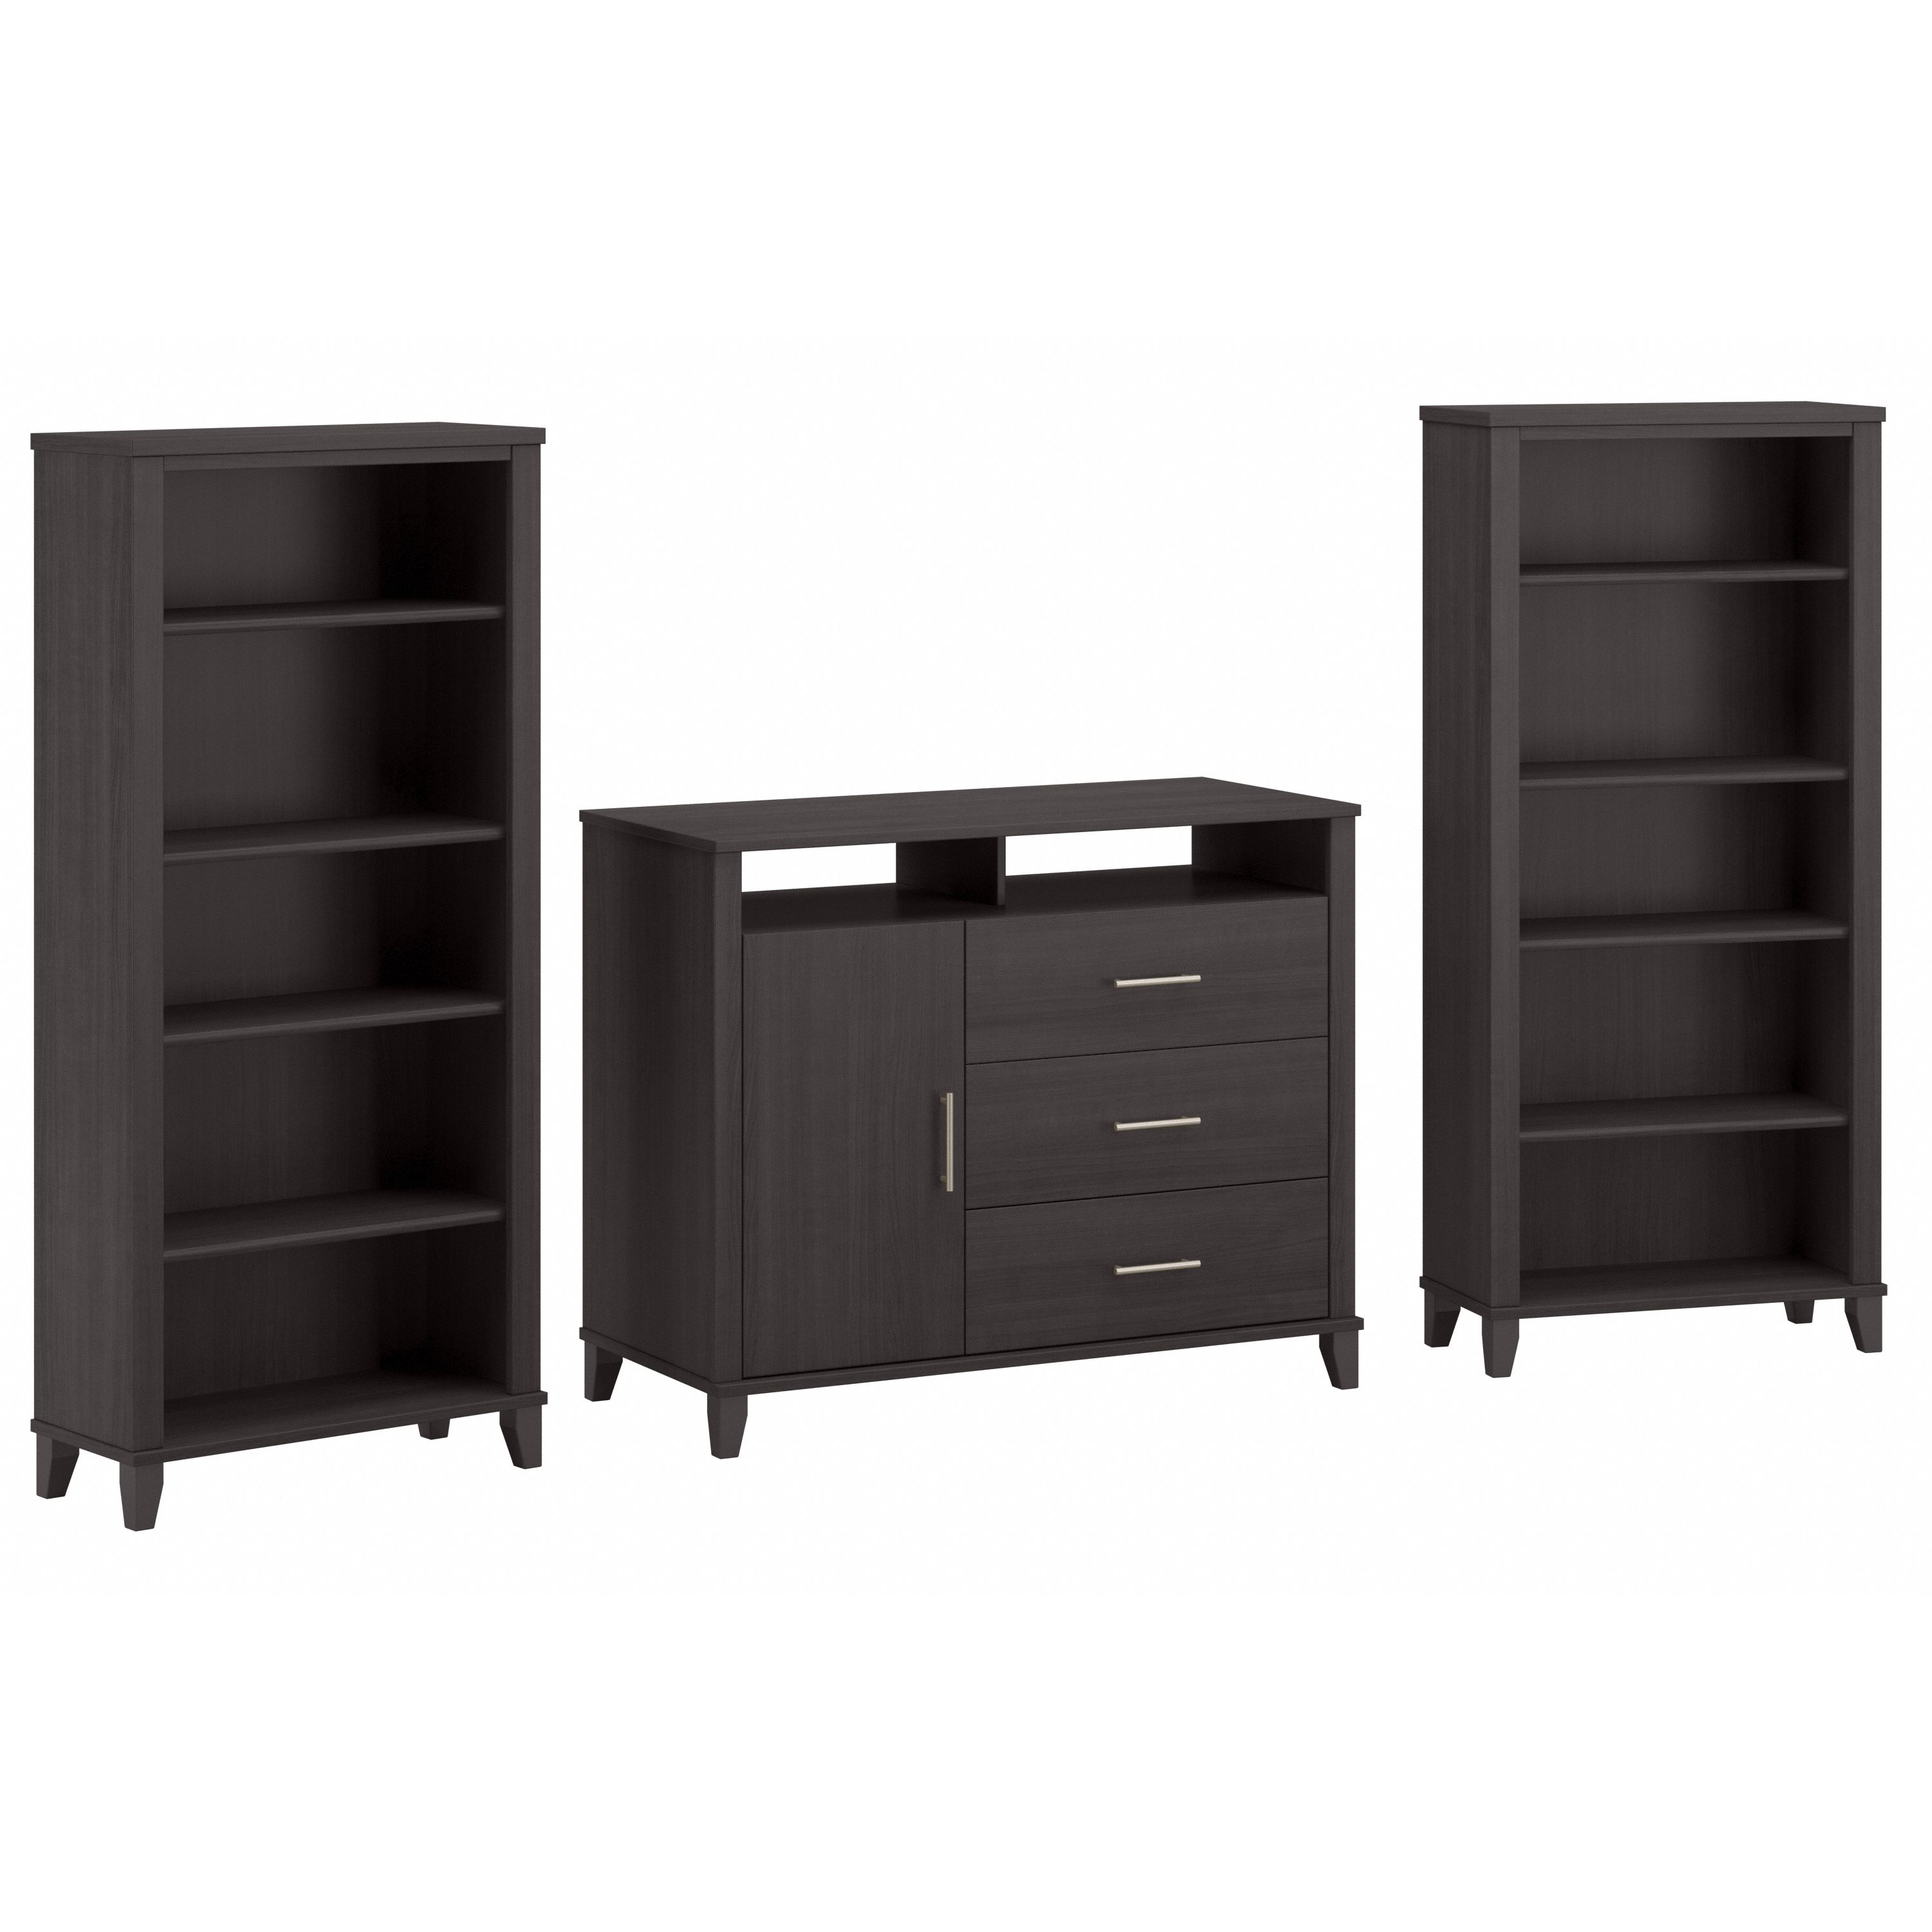 Shop Bush Furniture Somerset Office Storage Credenza with Bookcases 02 SET040SG #color_storm gray